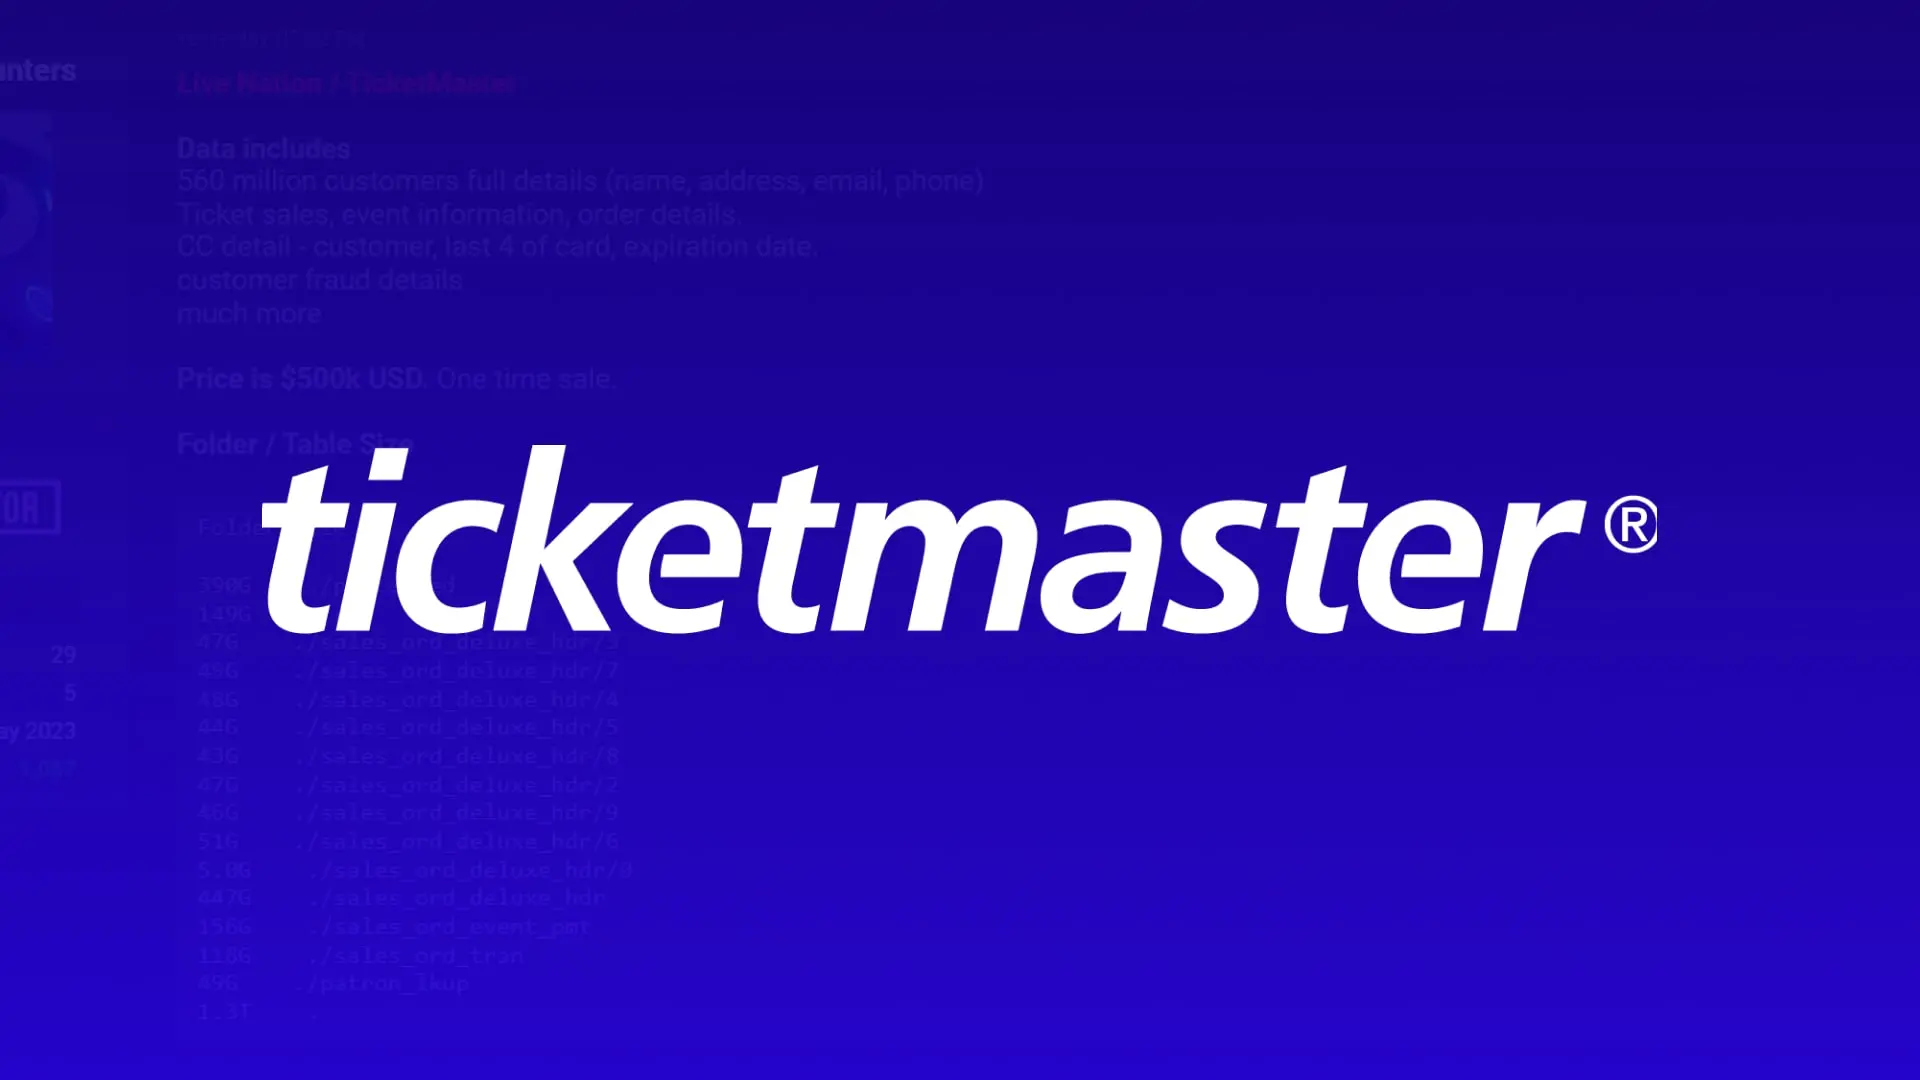 The logo of Ticketmaster on a blue background, with behind that a screenshot of the attacker's profile on BreachForums.